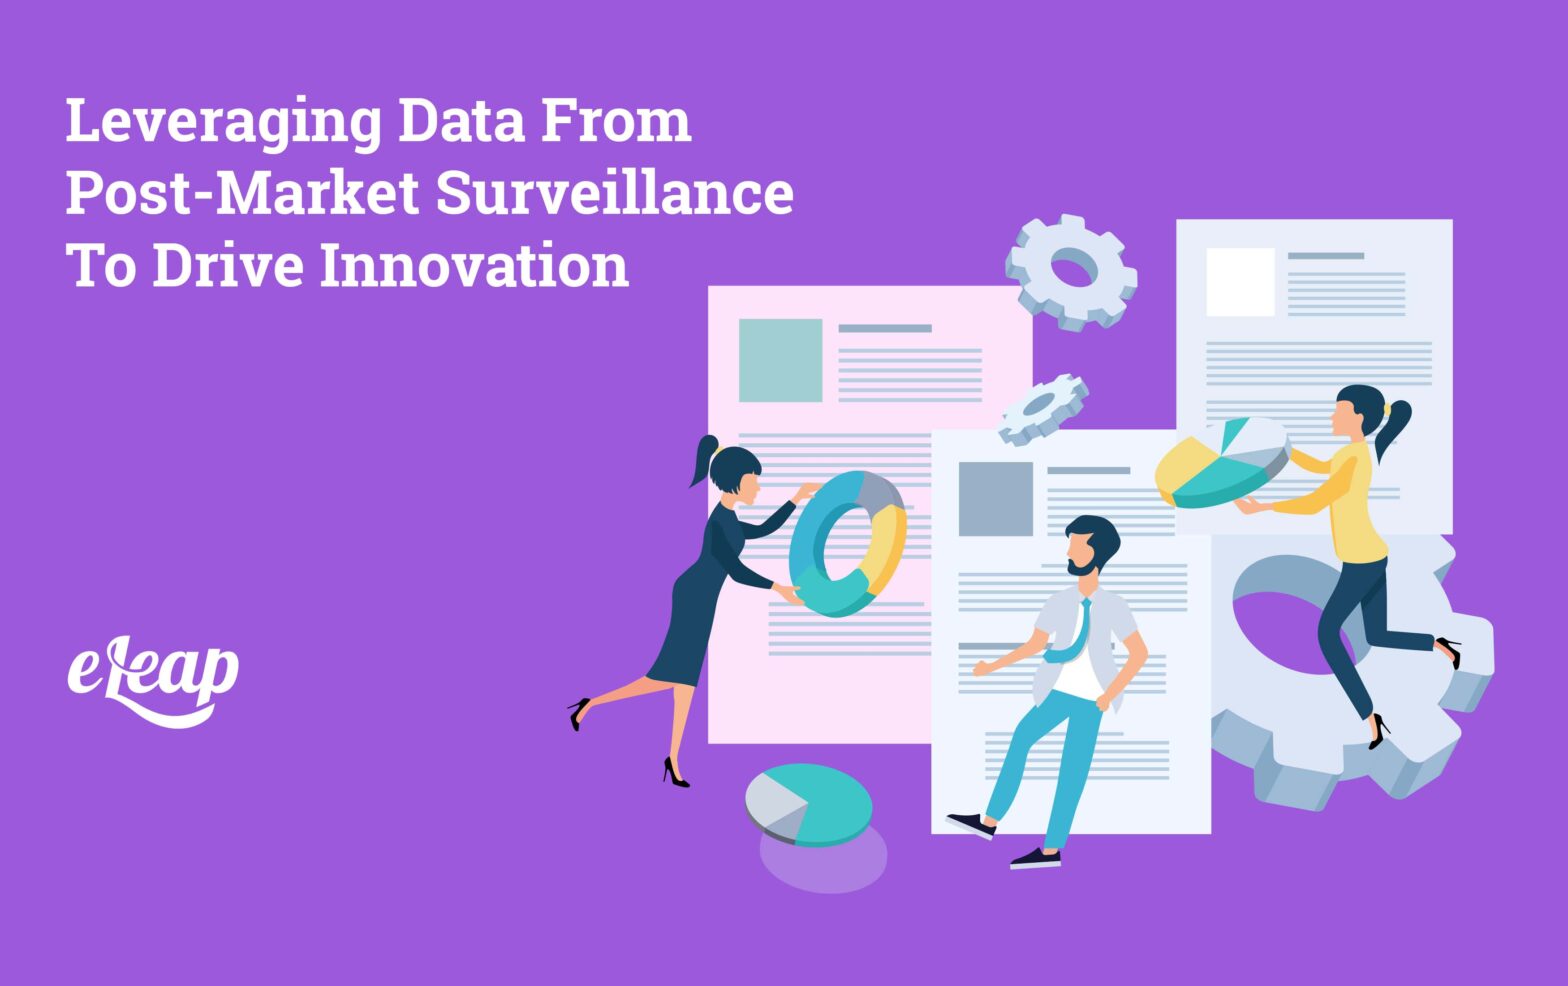 Leveraging Data From Post-Market Surveillance To Drive Innovation